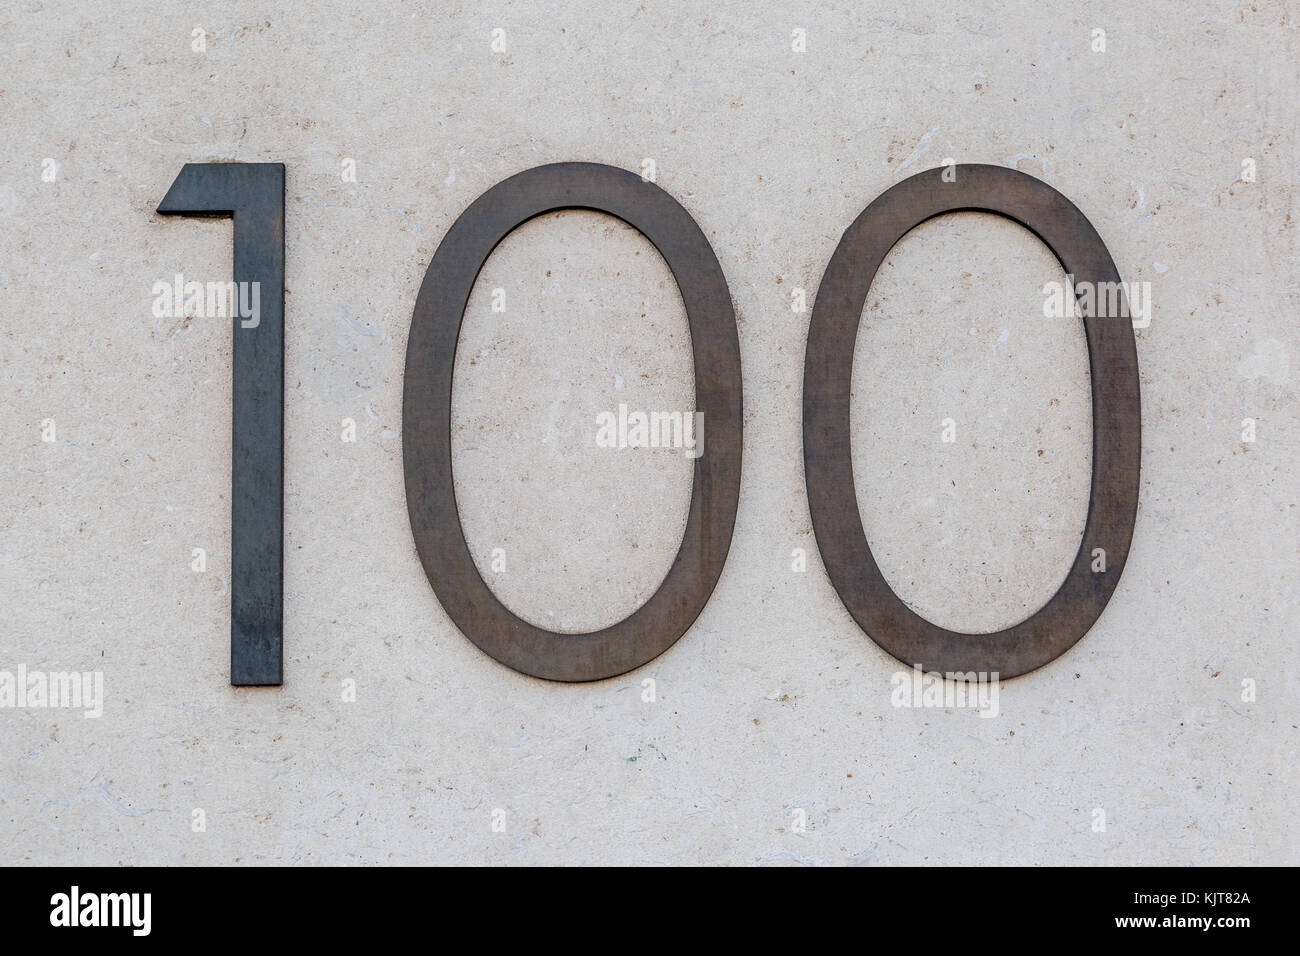 A metal sign for 100 / hundred on a wall in London, UK Stock Photo